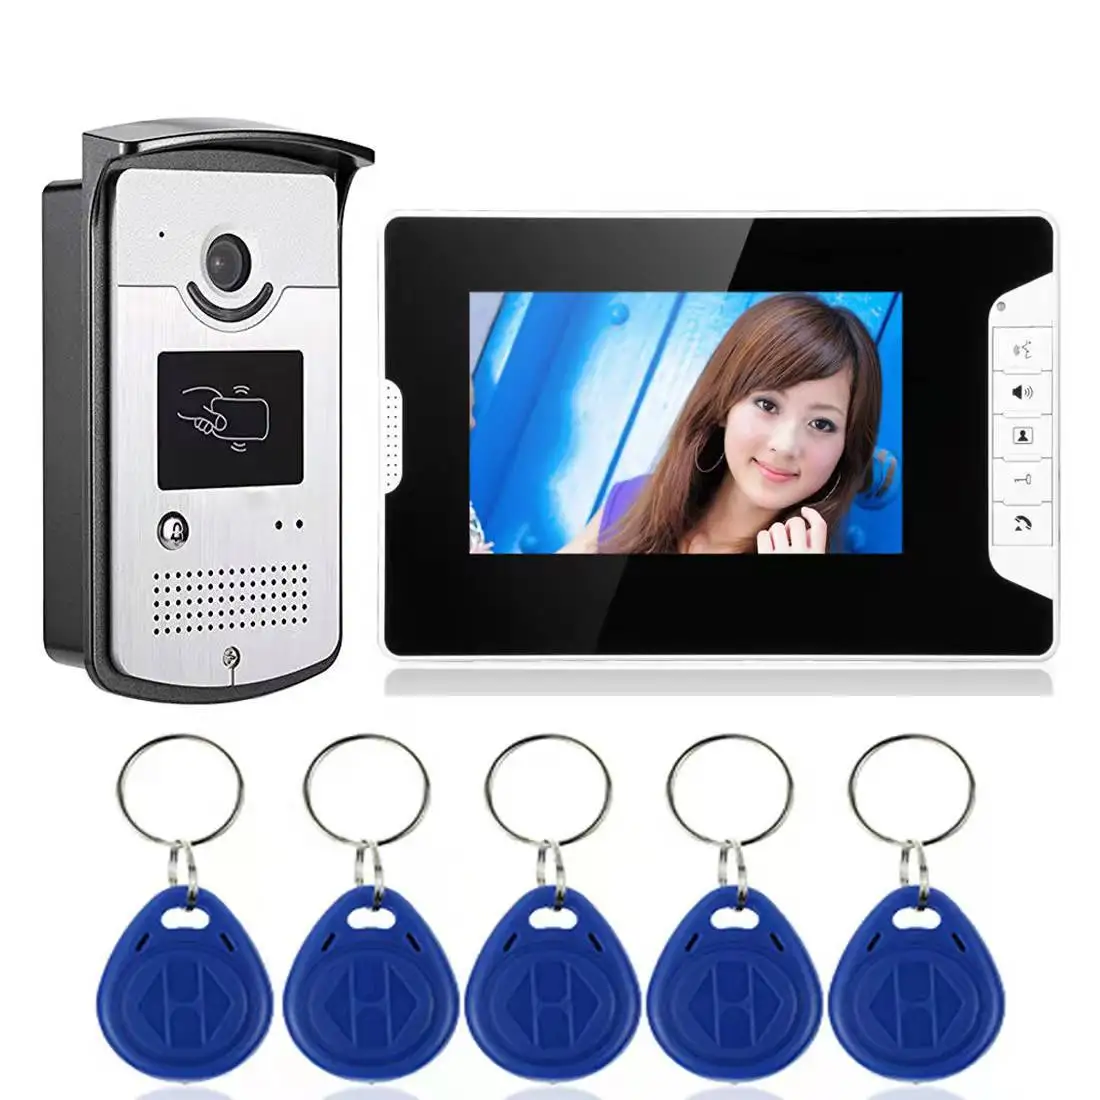 7-inch color visual doorbell outdoor unit ID card night vision rainproof one-to-one visual intercom